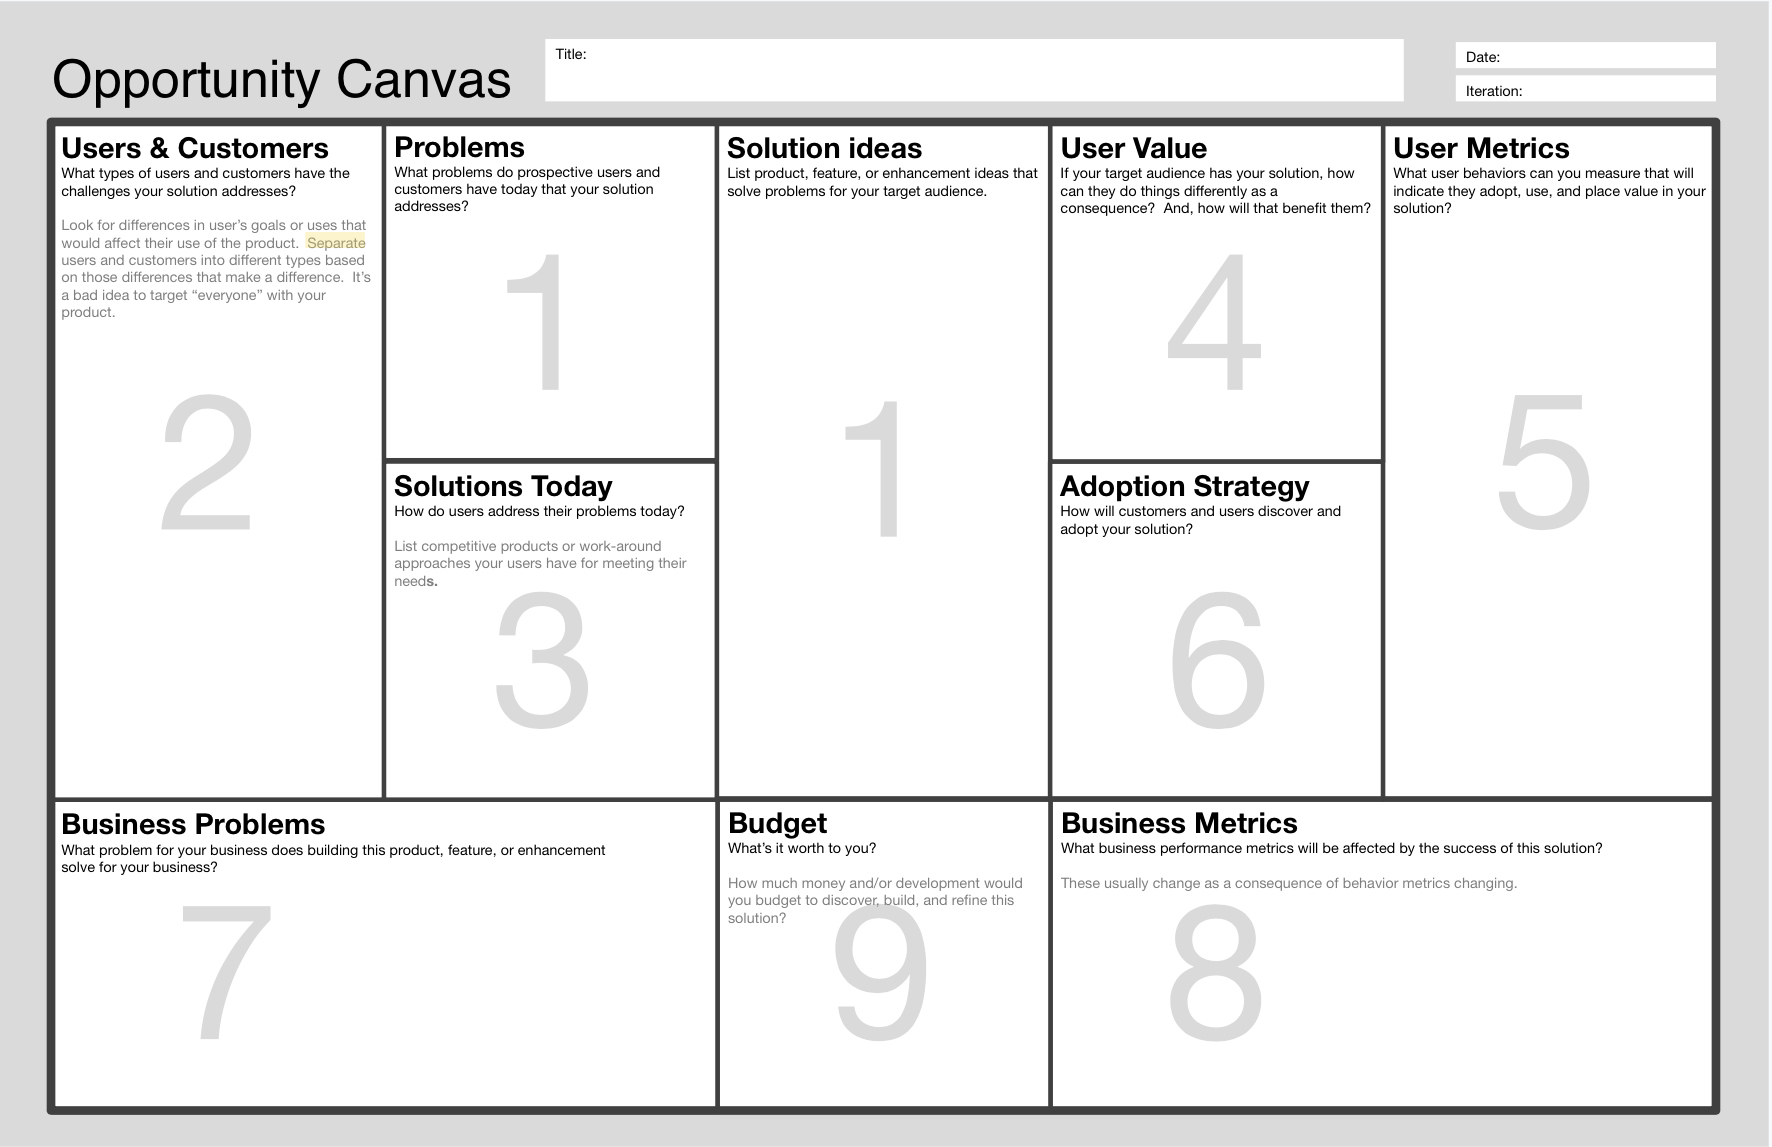 Example of an opportunity canvas